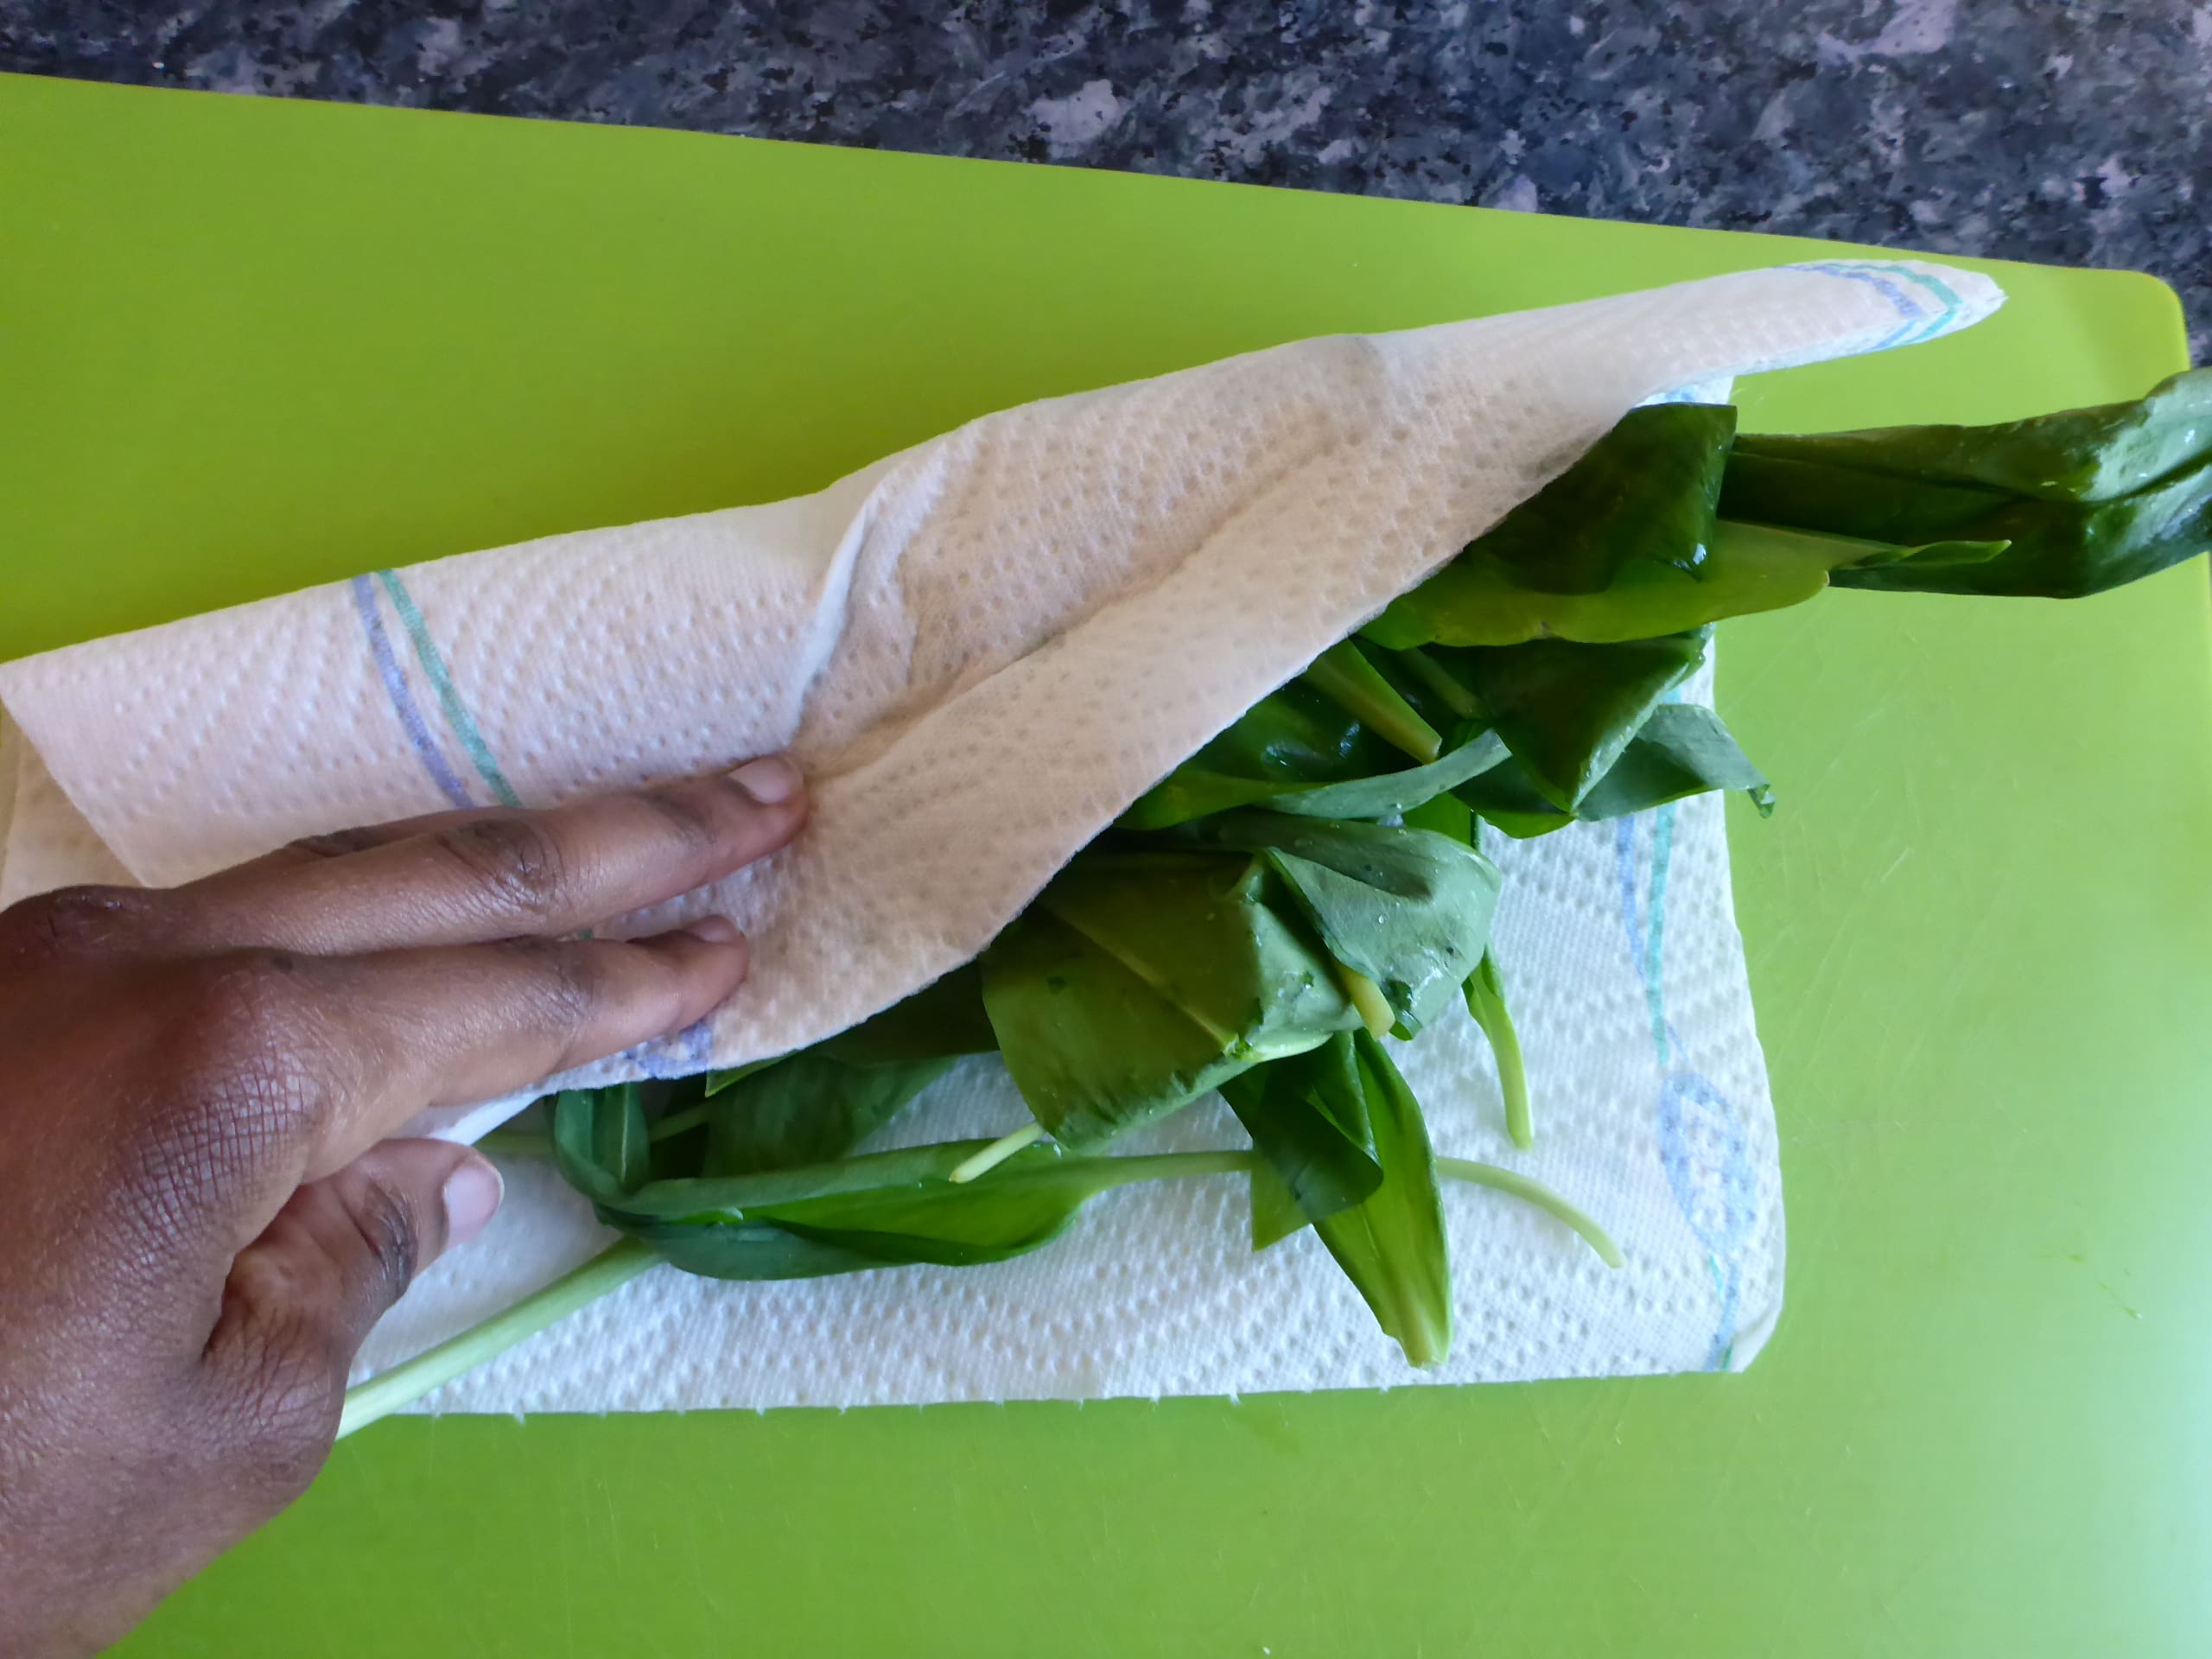 Drying Cleaned Wild Garlic Leaves with Paper Towels to Remove Excess Water.